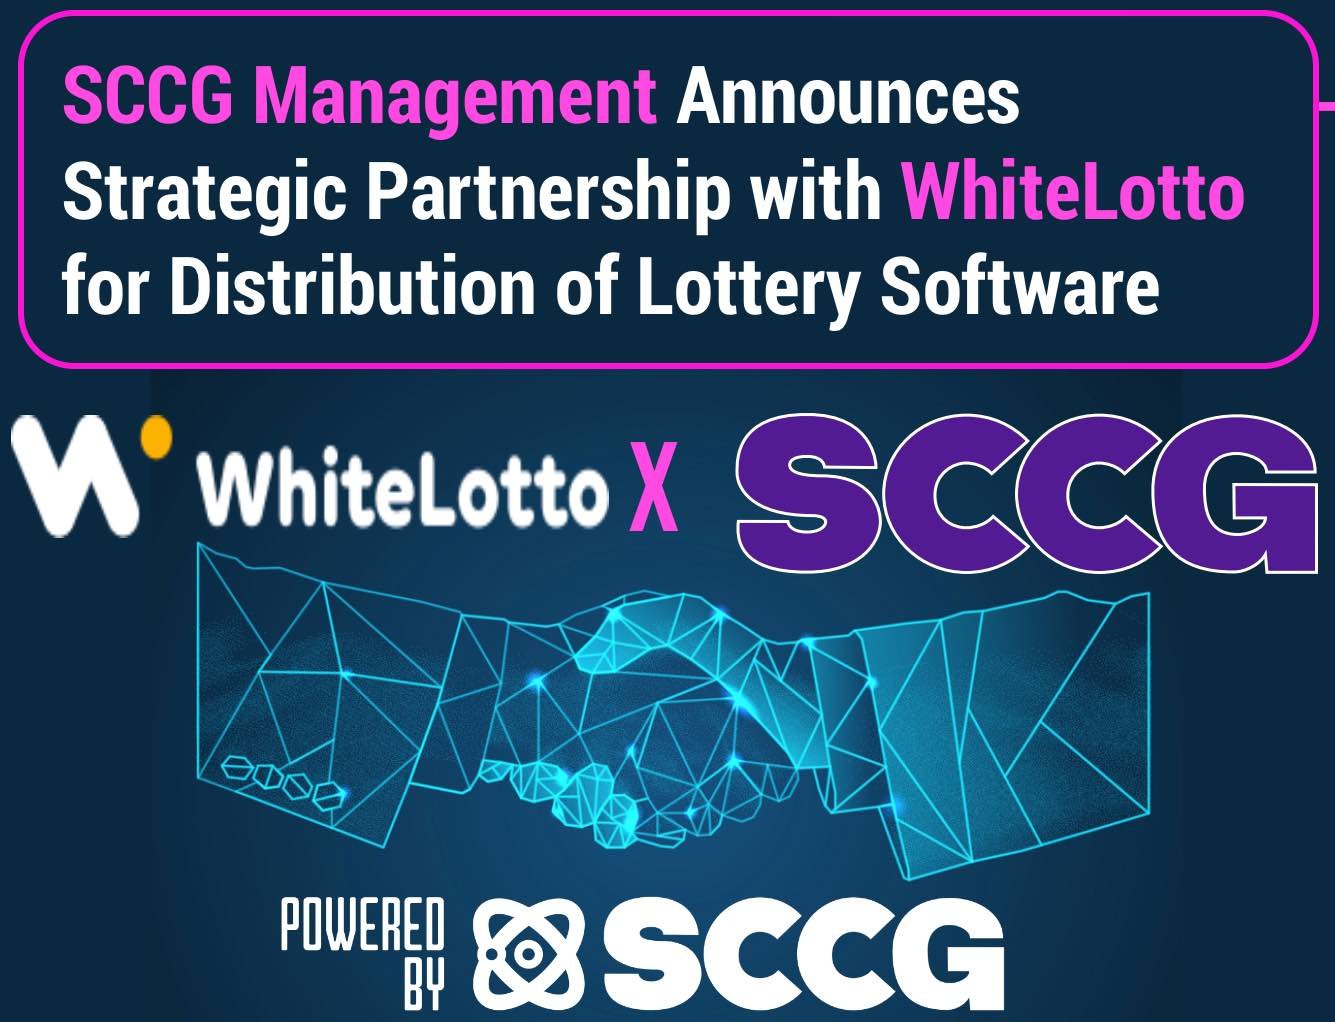 SCCG Management announces atrategic partnership with WhiteLotto for distribution of lottery software solutions